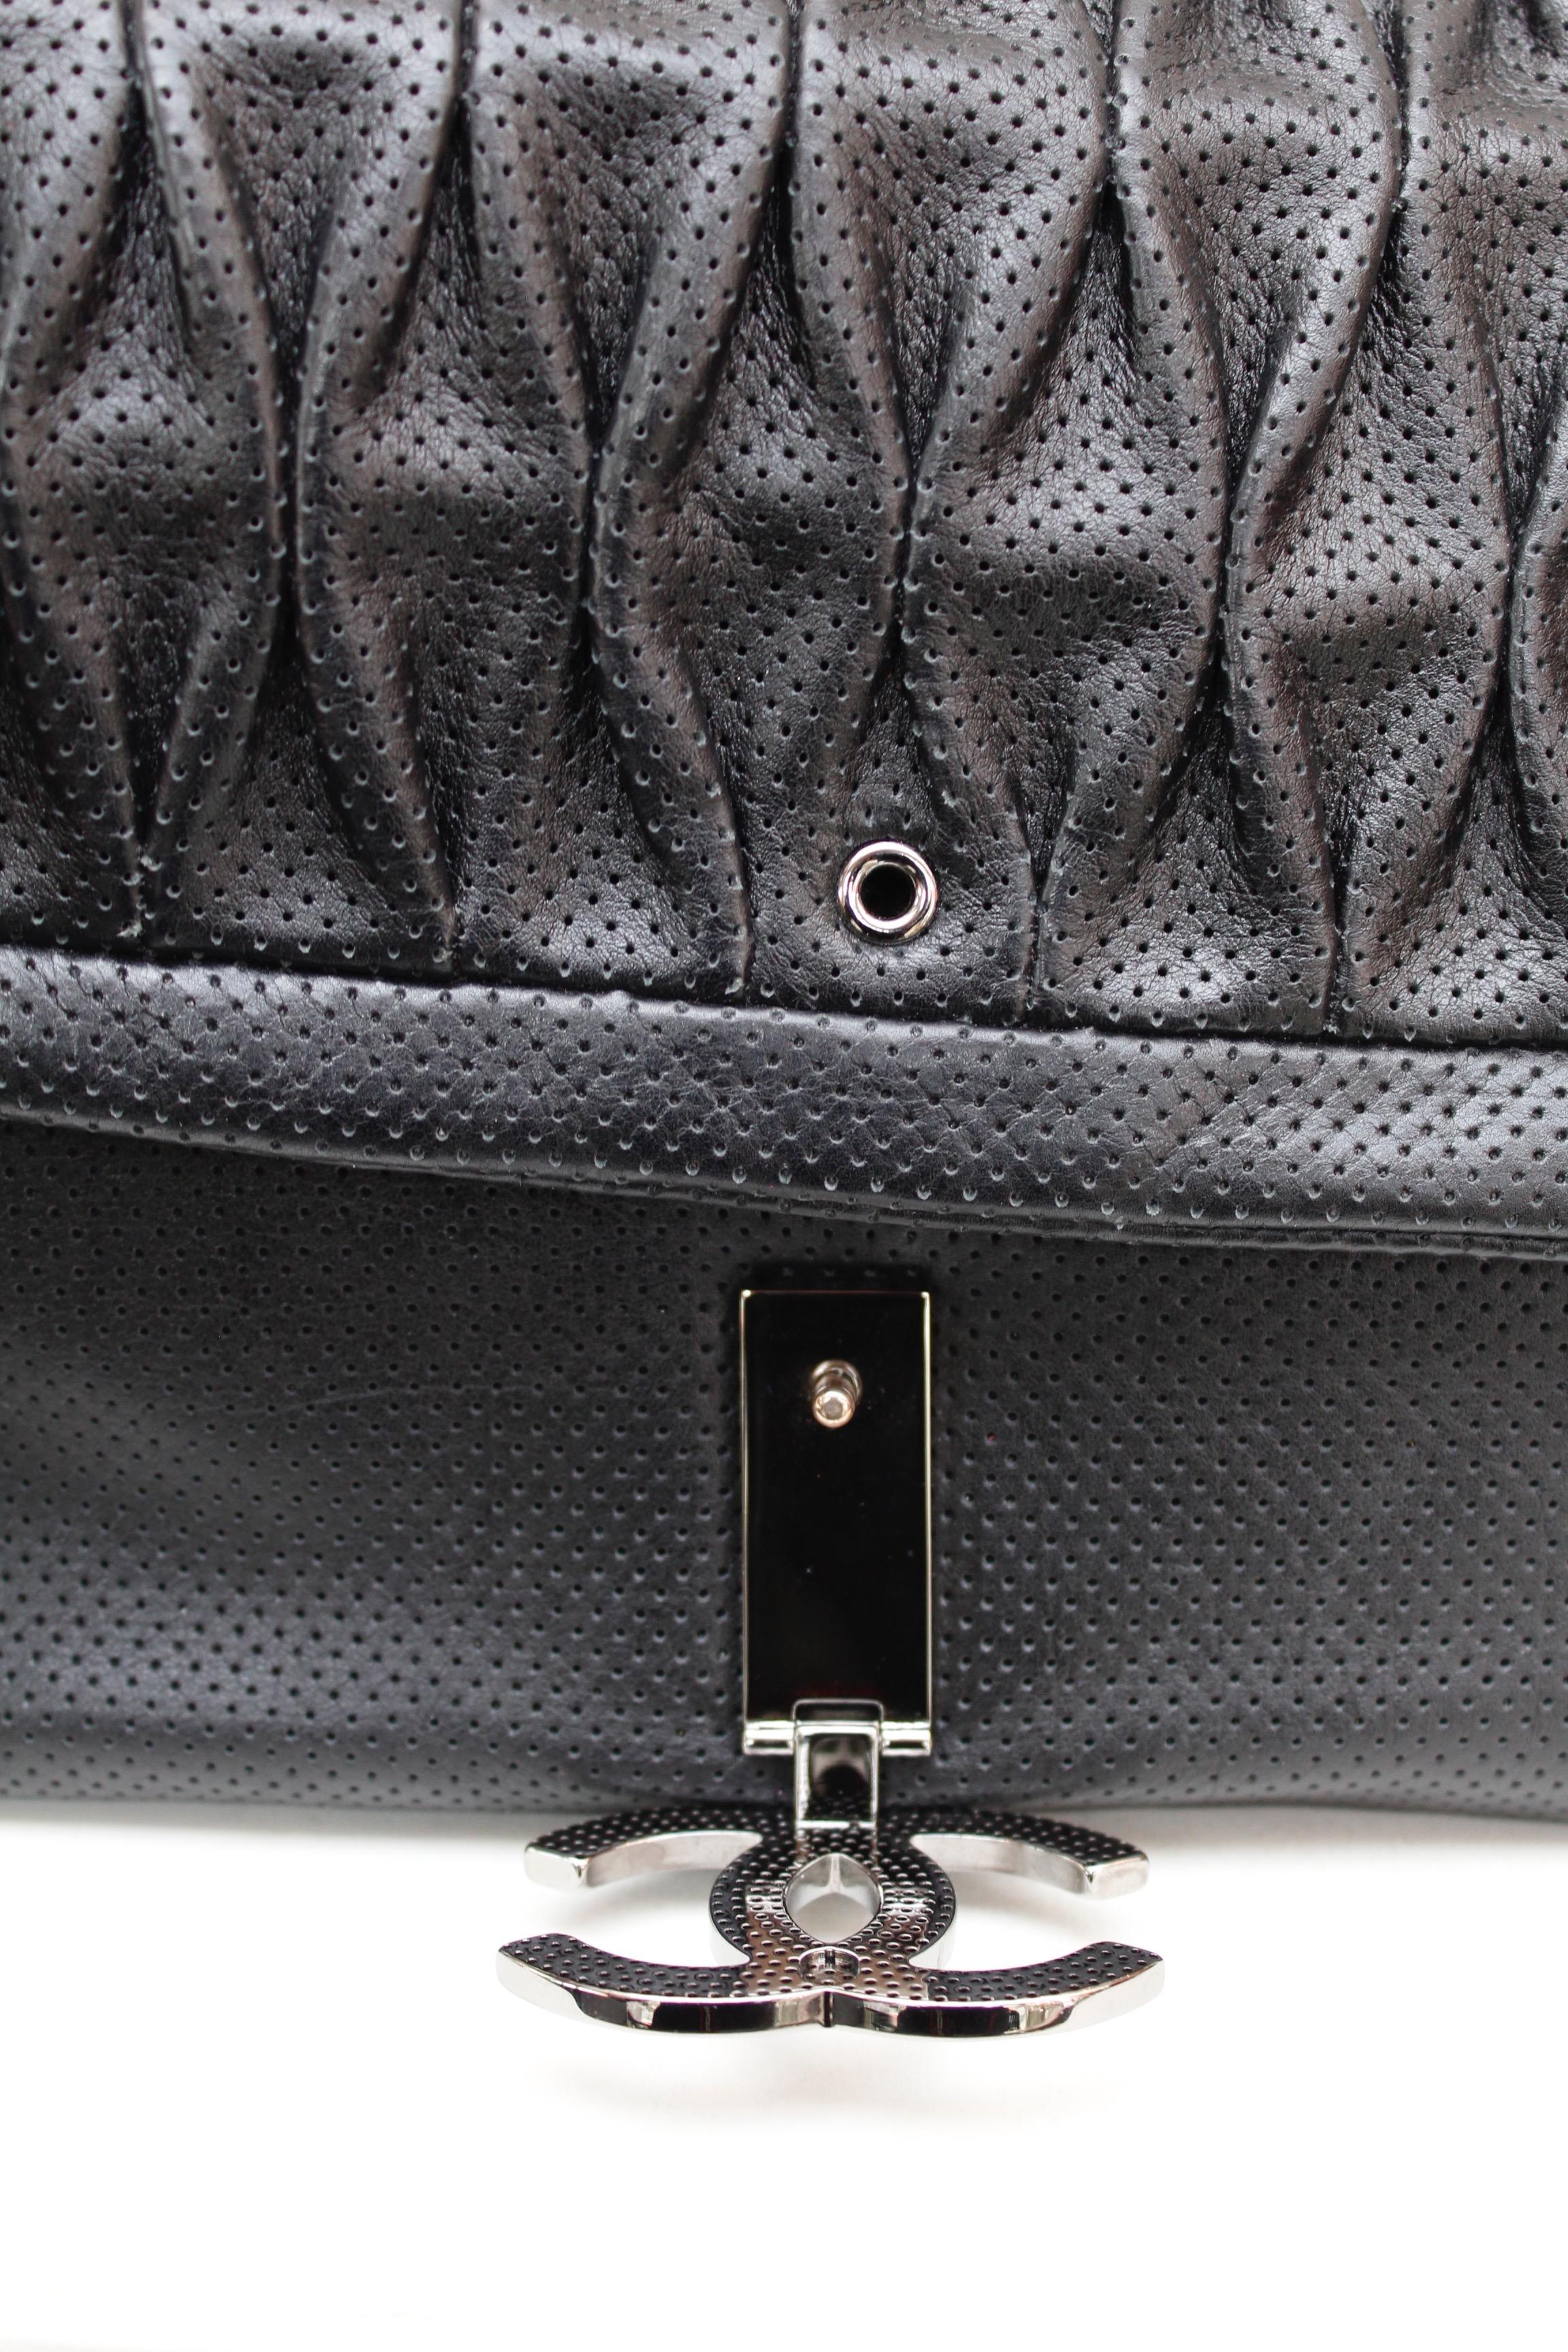 Chanel superb black leather bag, 2008/2009 Fall/Winter Collection 2